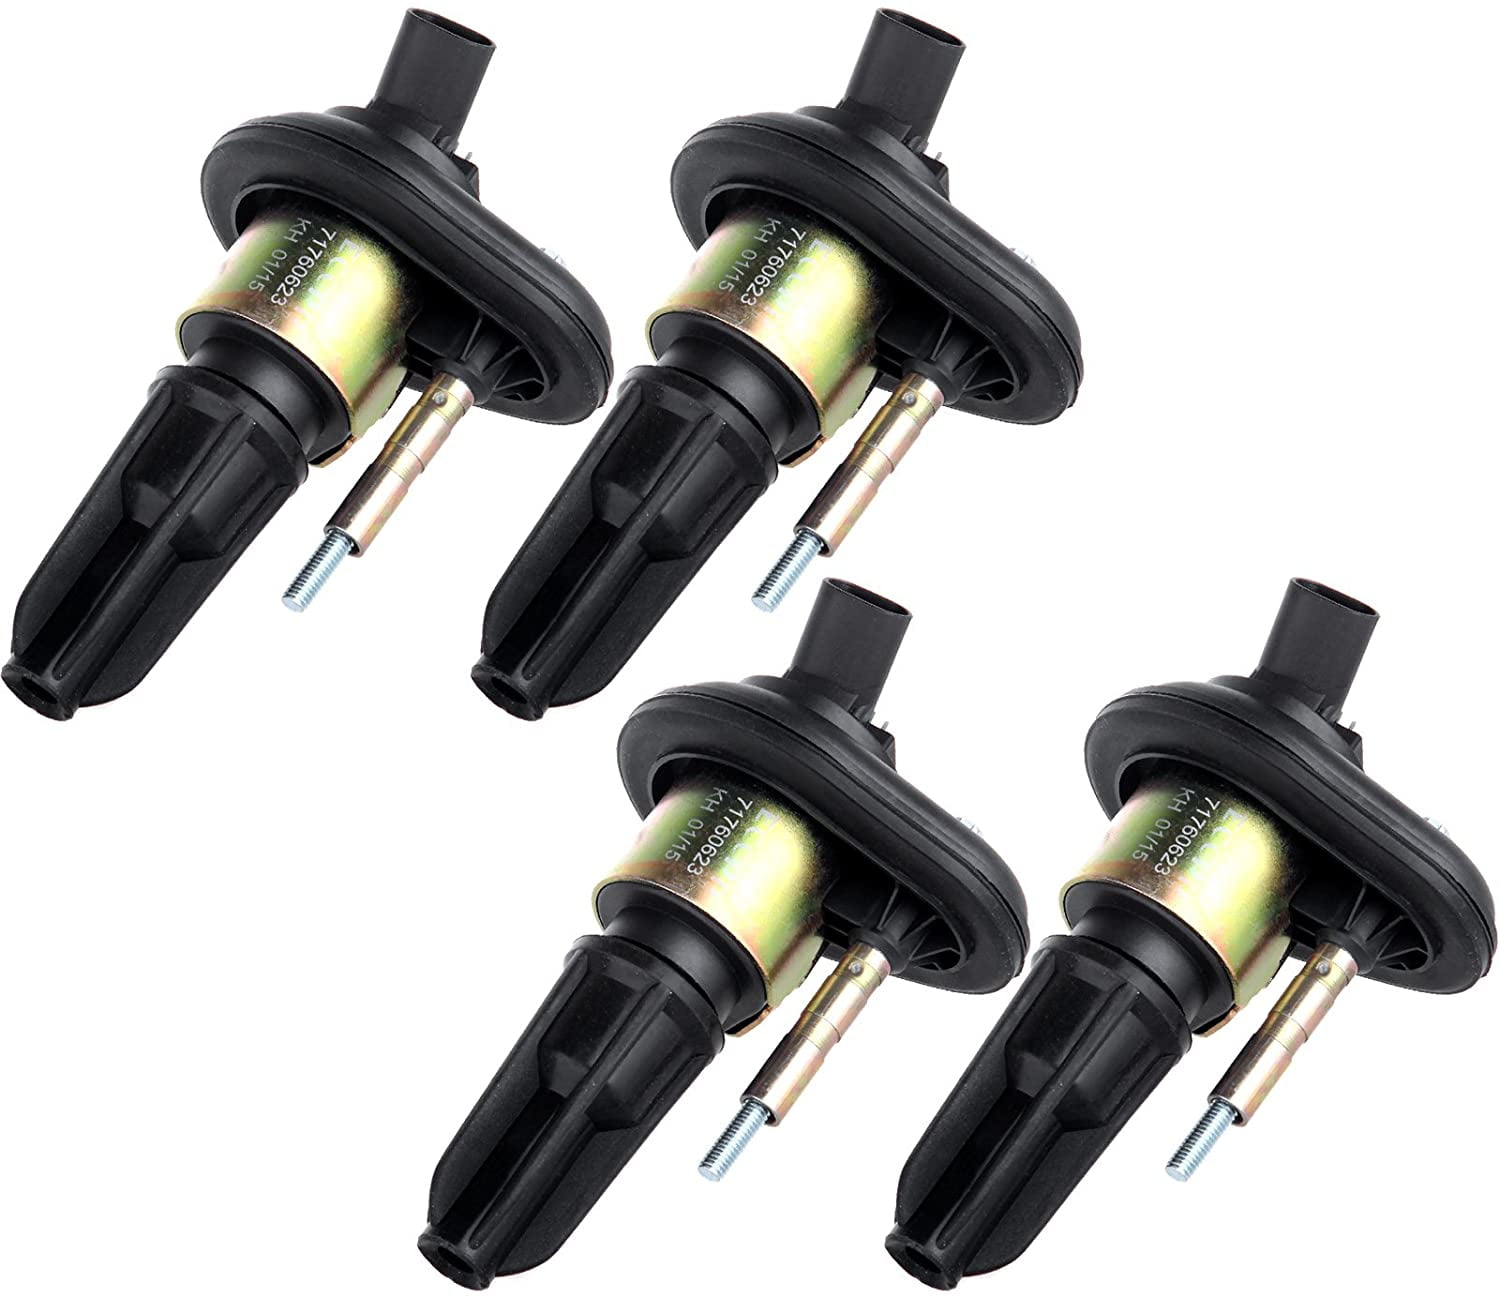 Set of 4 Ignition Coil on Plug Packs Fit Chevy/GMC/Isuzu/Buick/Saab/Hummer/Olds